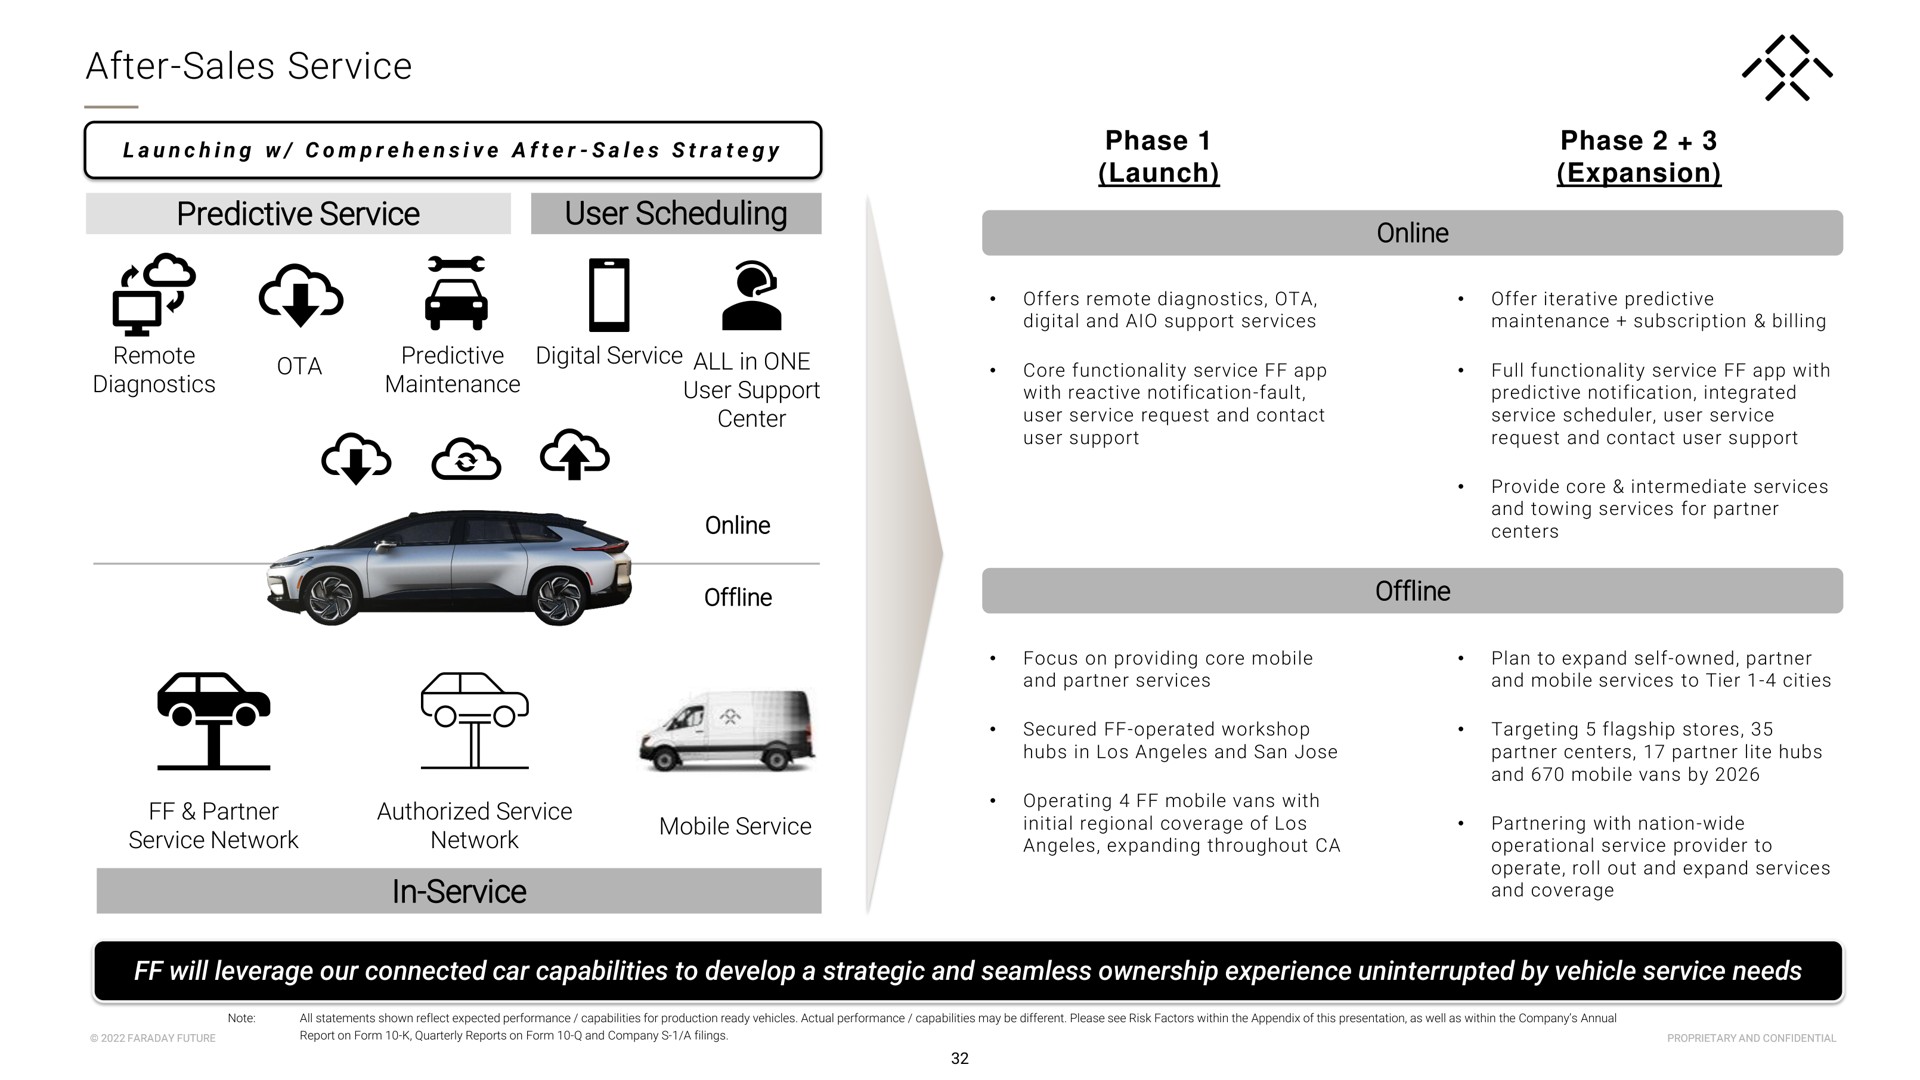 after sales service predictive service user scheduling in service network network mobile | Faraday Future